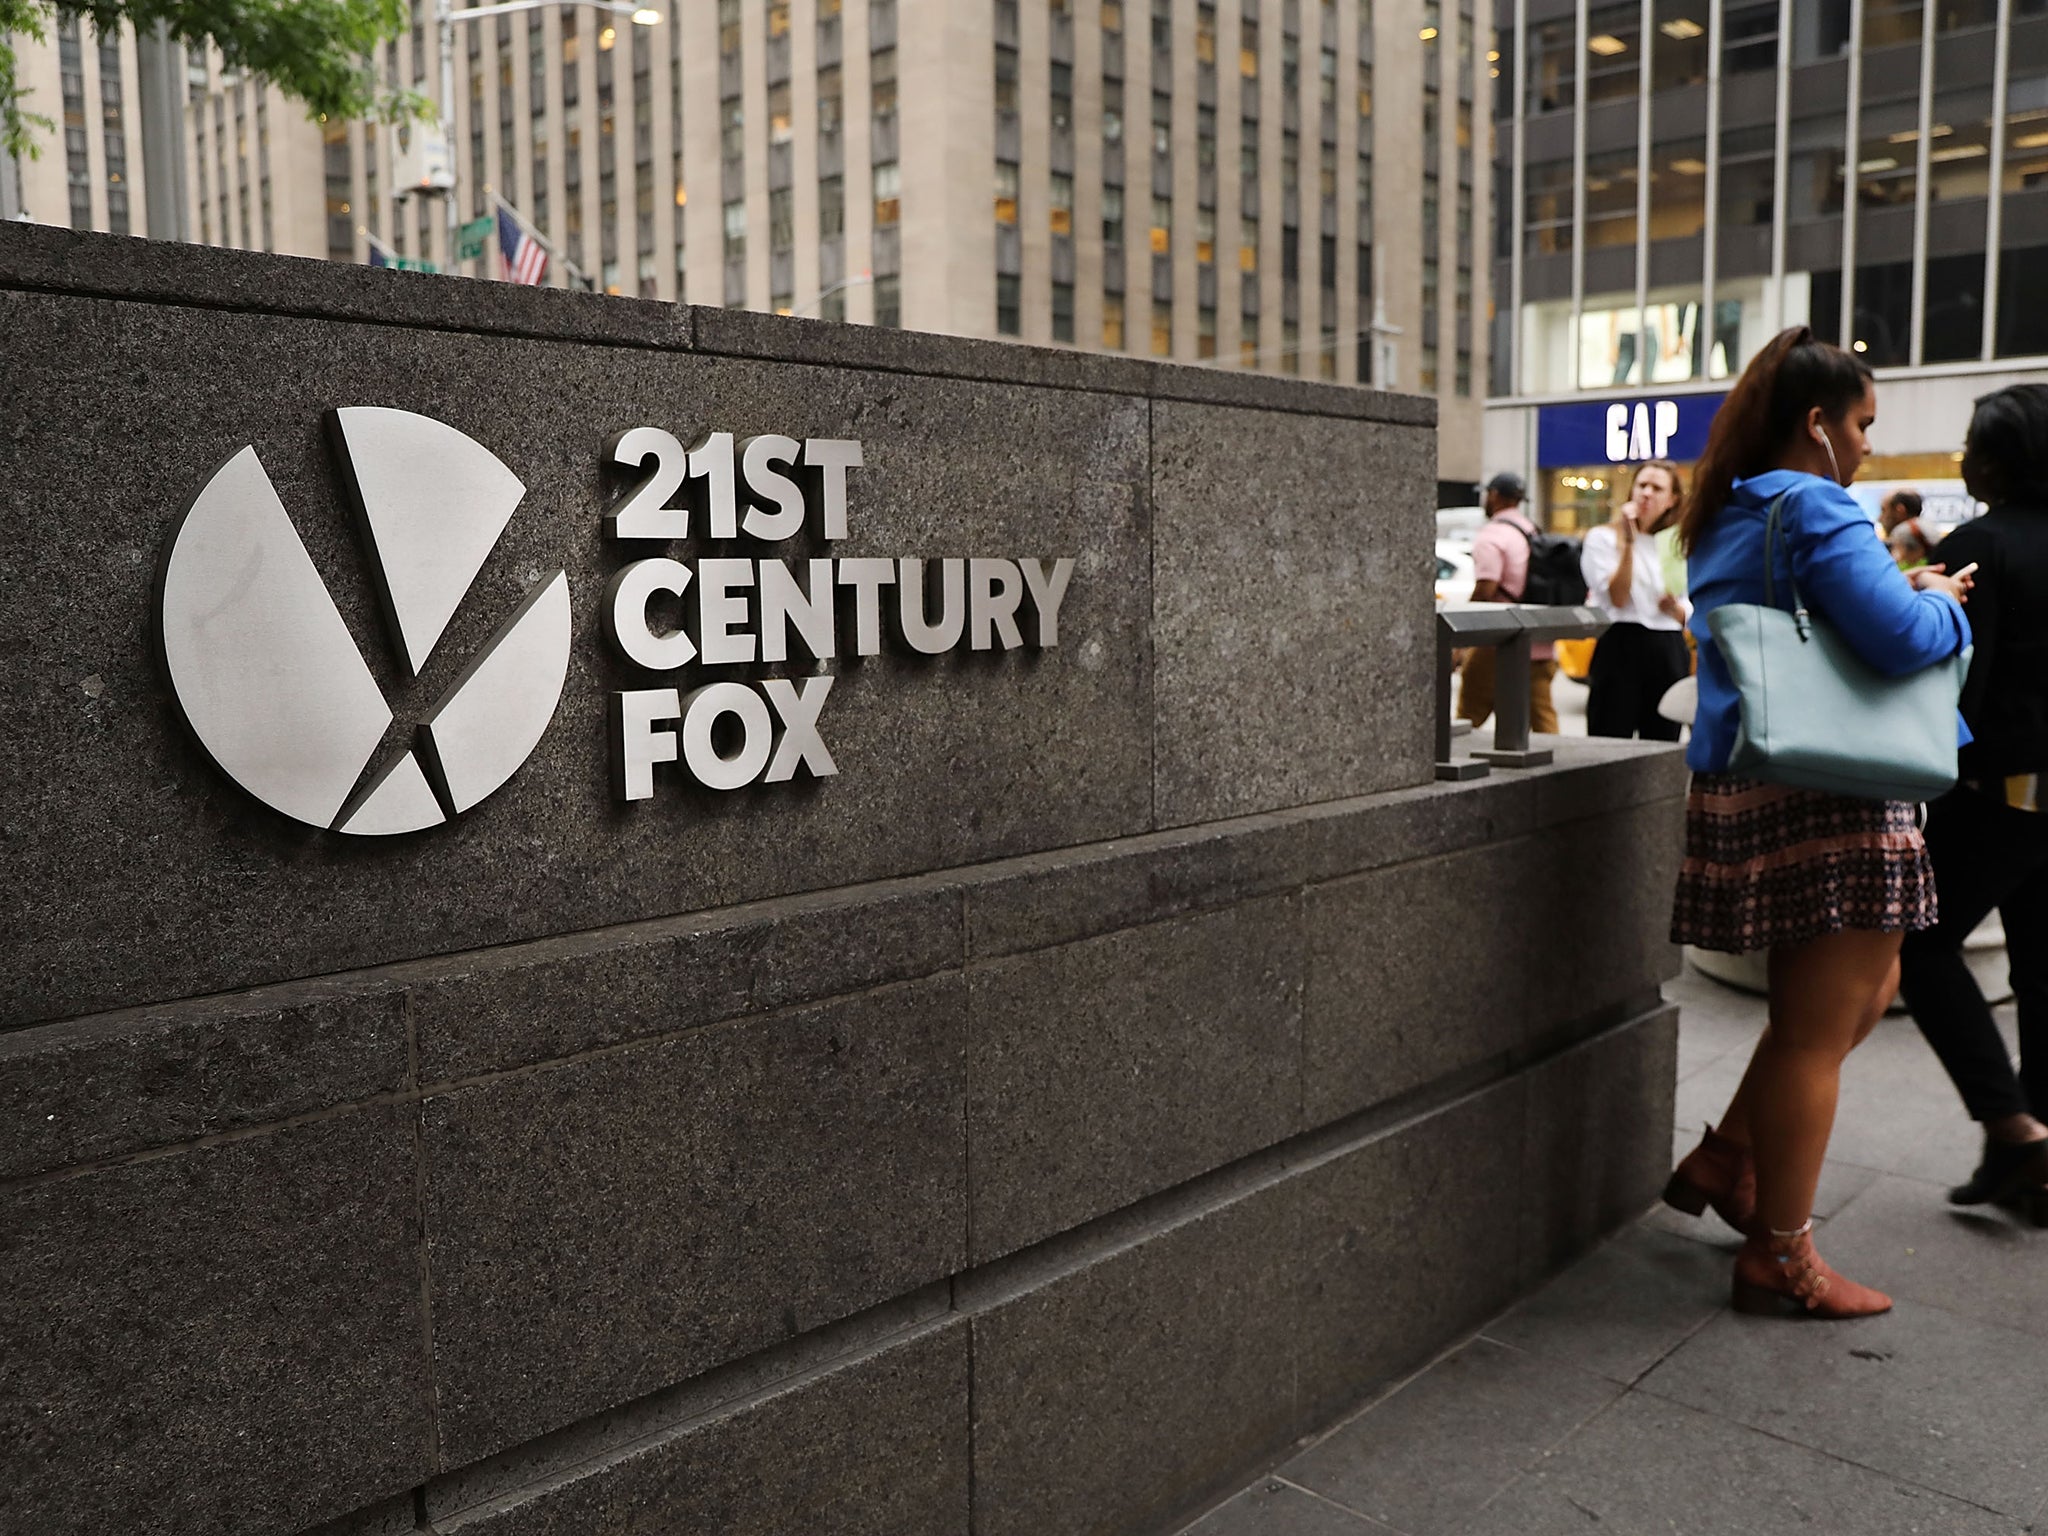 Fox Media said in its application that it wanted to use it for an 'ongoing television series featuring reality competition, comedy, and game shows'